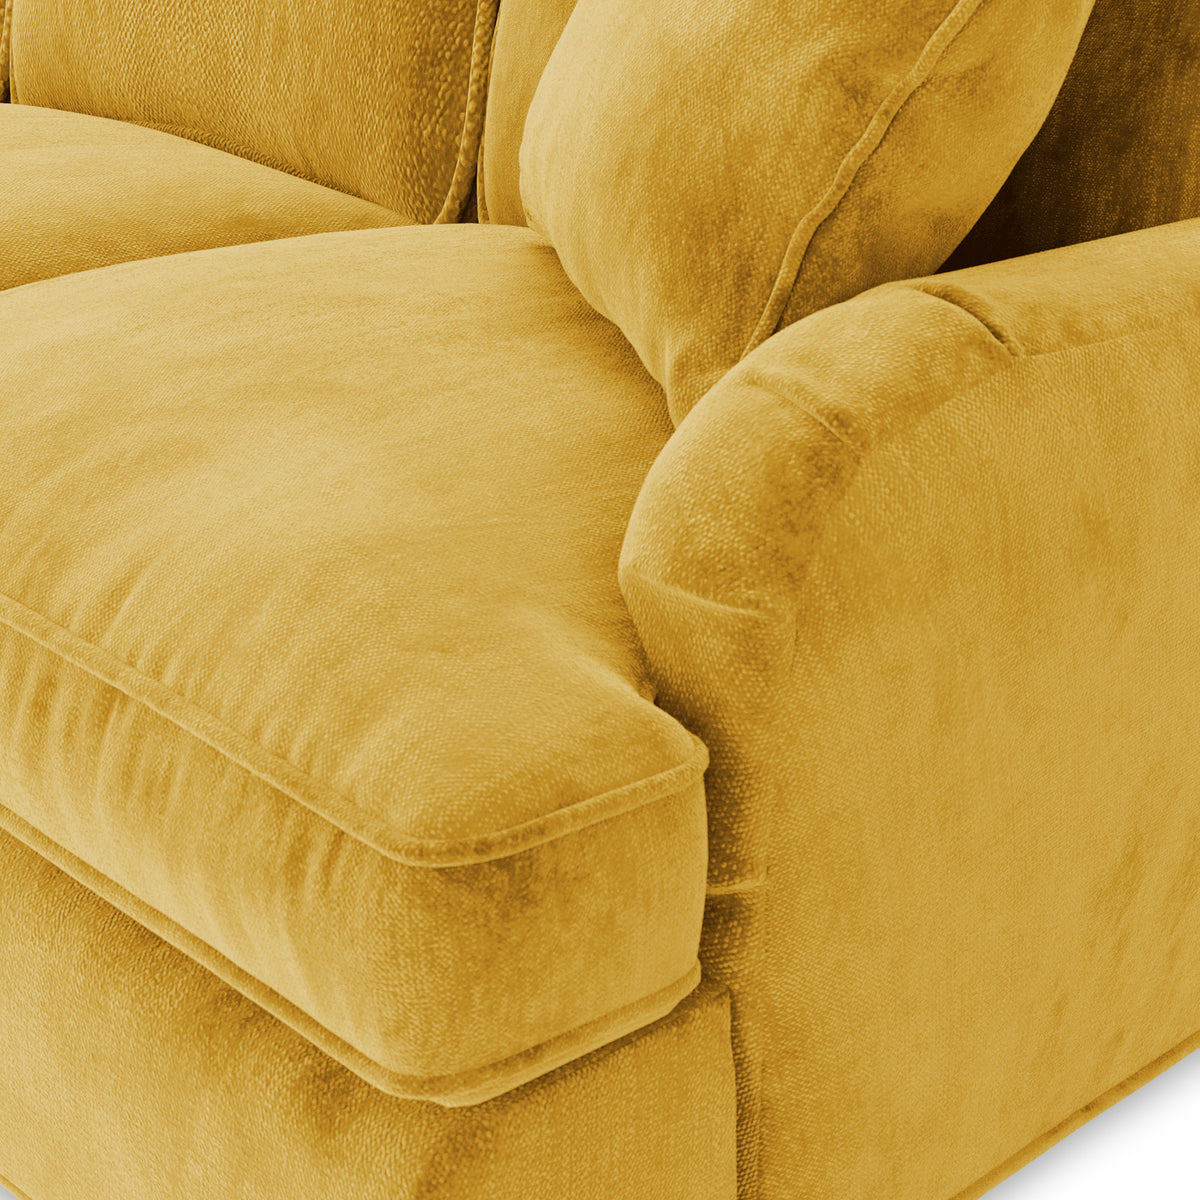 Arthur Gold 4 Seater Sofa from Roseland Furniture